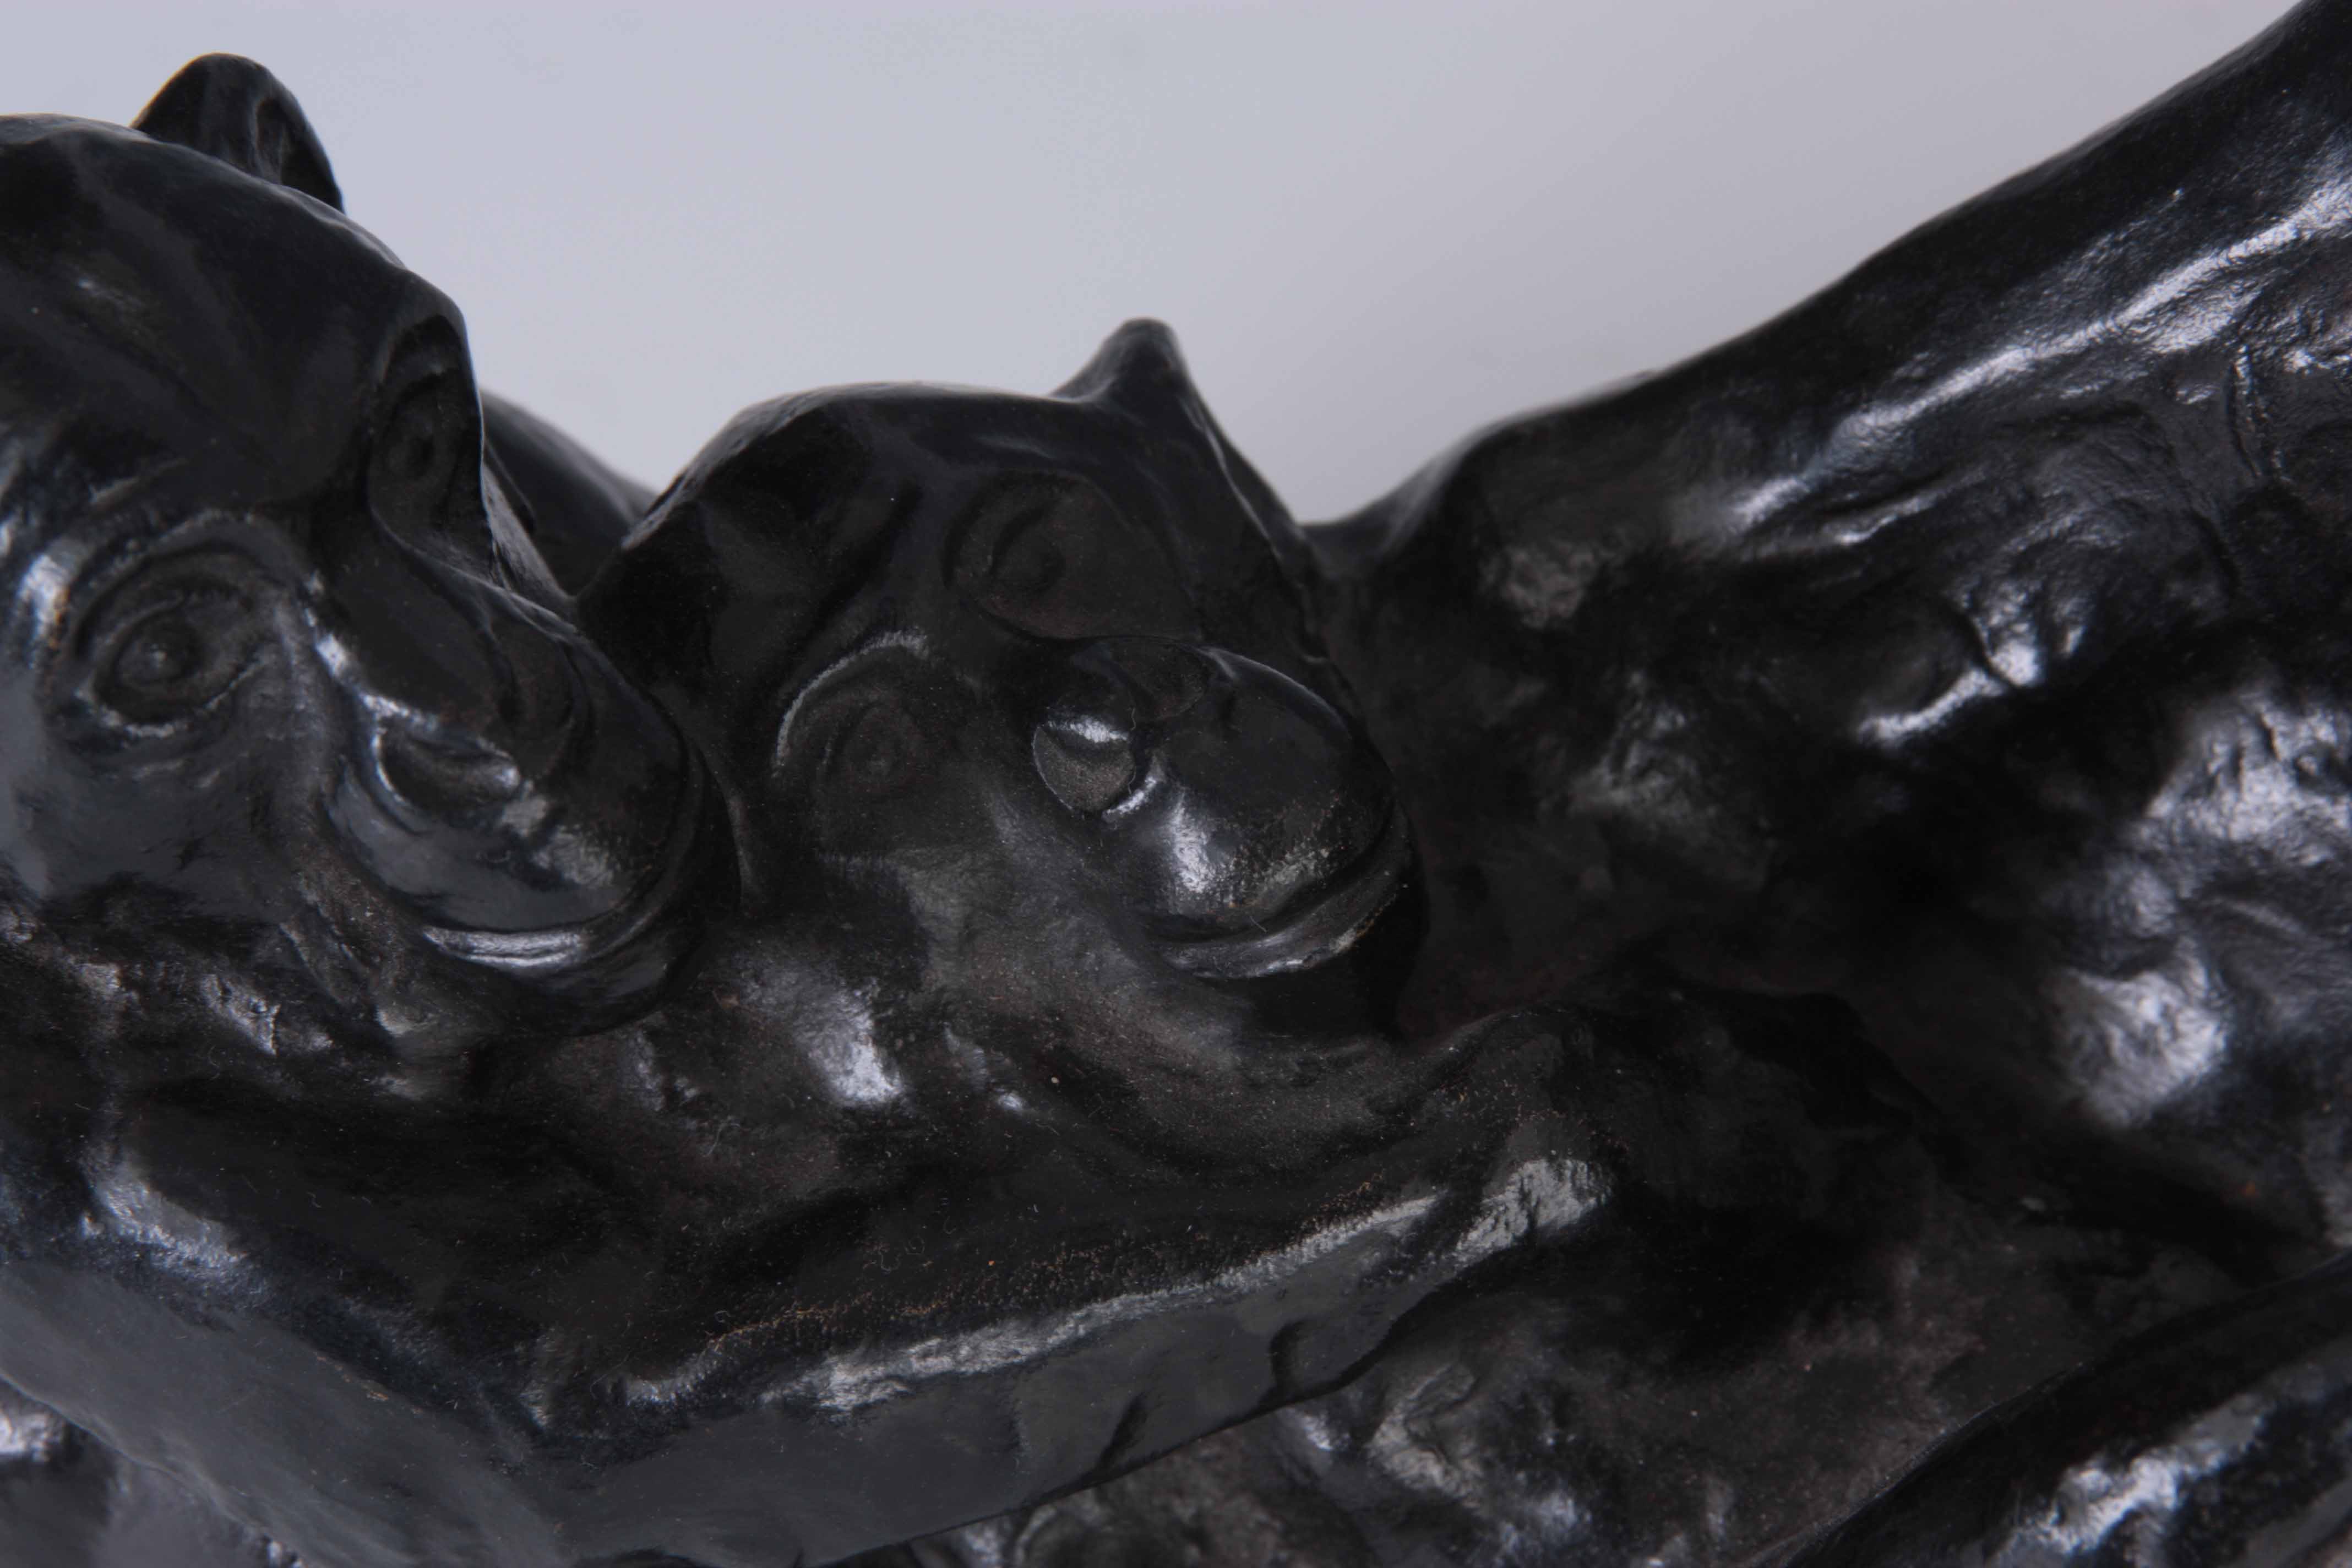 IRENEE RENE RICHARD. A 1930's FRENCH PATINATED BRONZE SCULPTURE modelled as two playful monkeys - Image 6 of 9